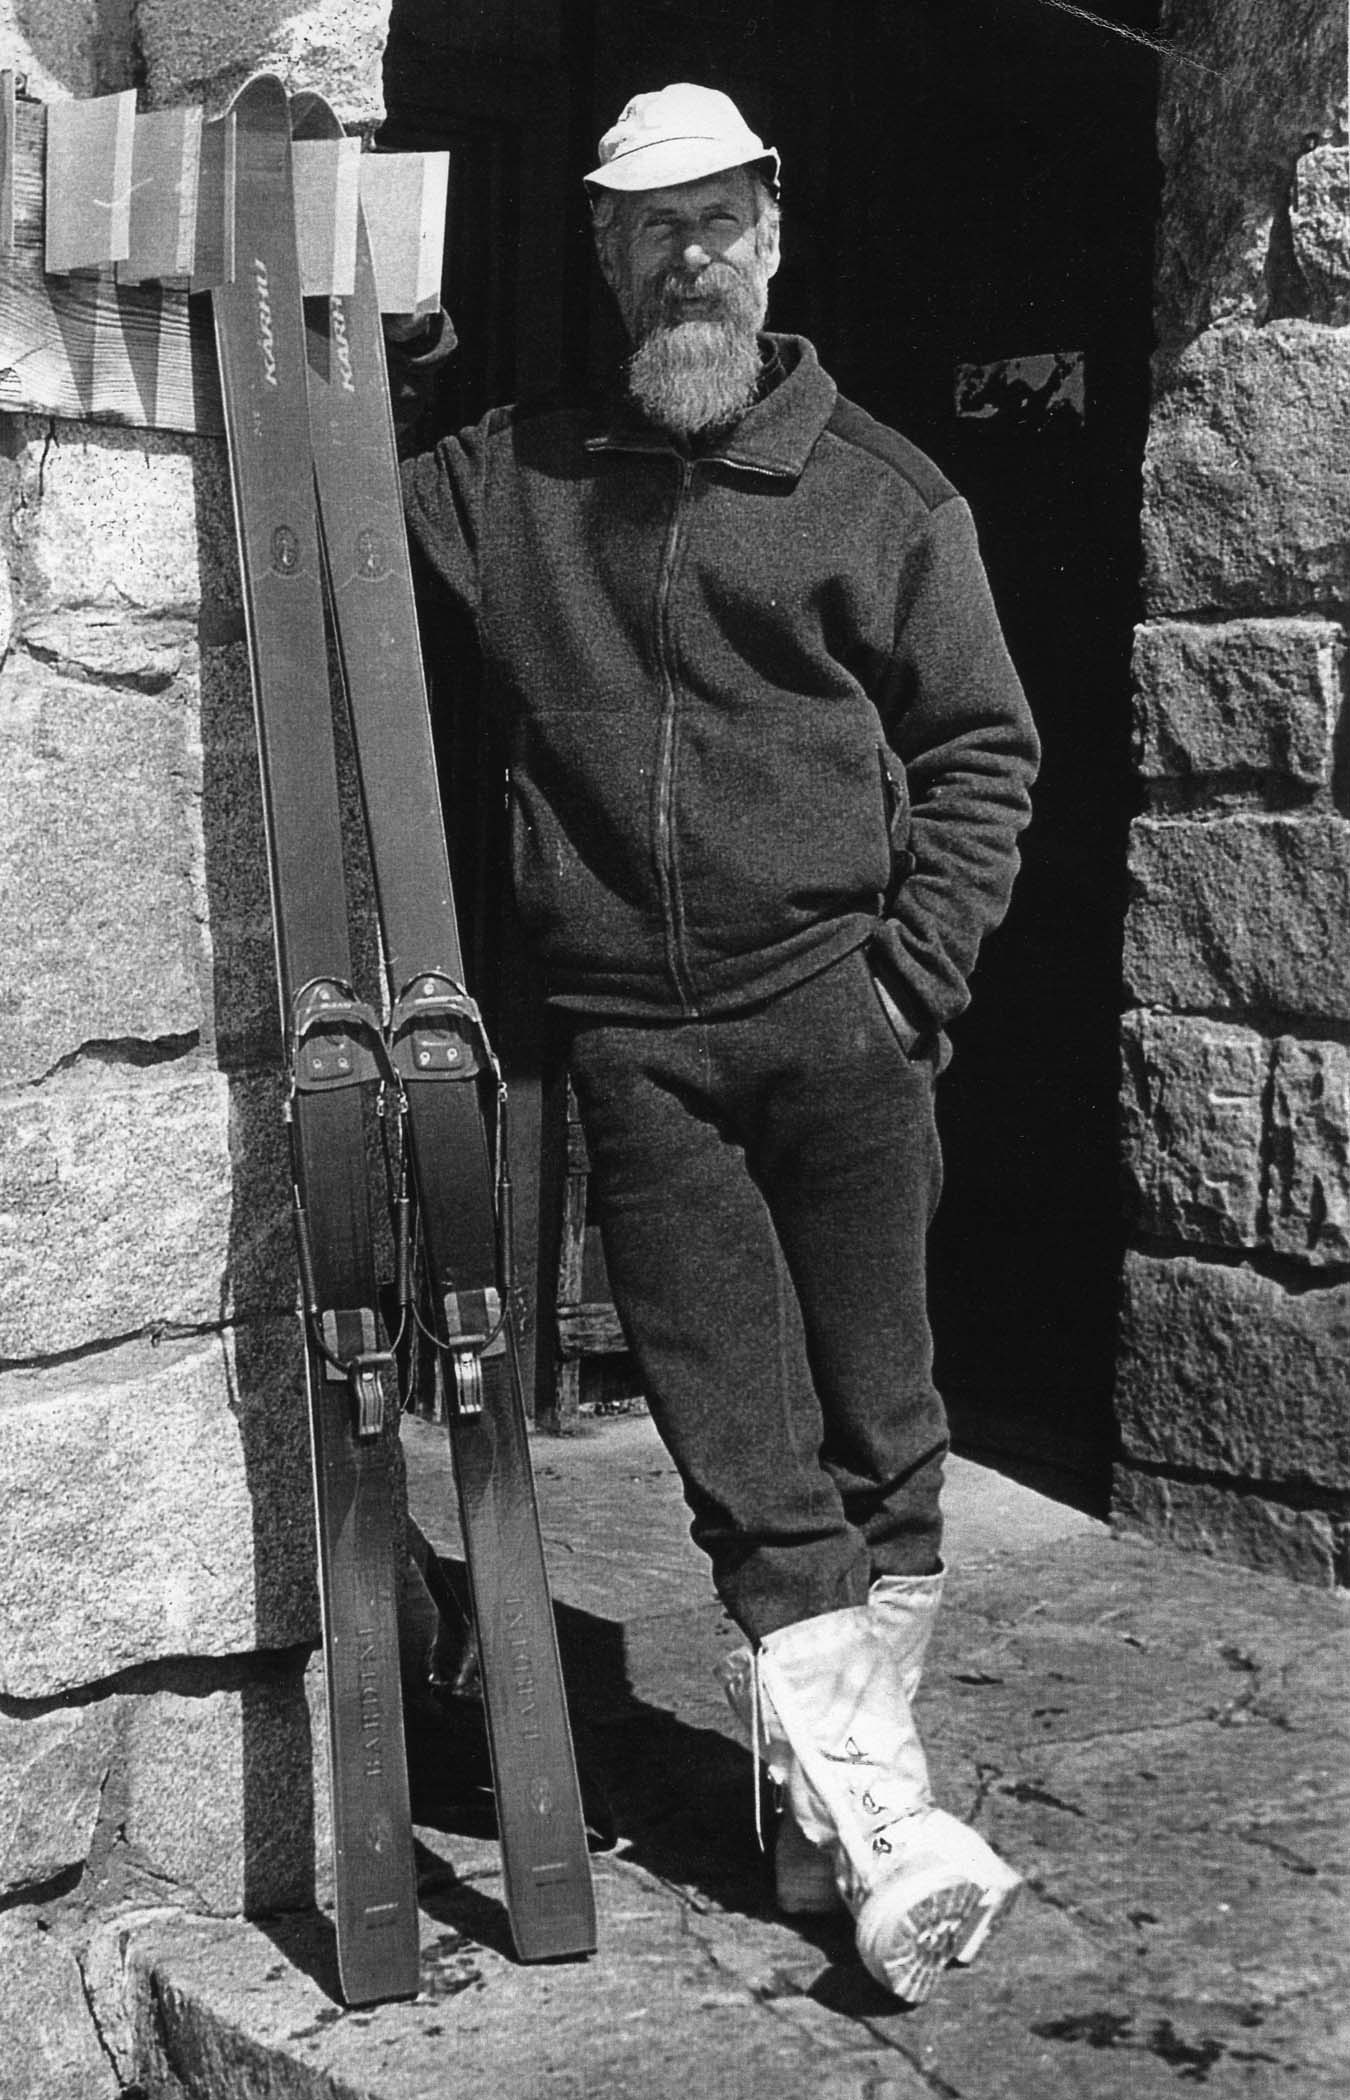 Howard Weamer, the hutkeeper at Ostrander for more than 50 years, leans agains the hut with skis leaning beside him.